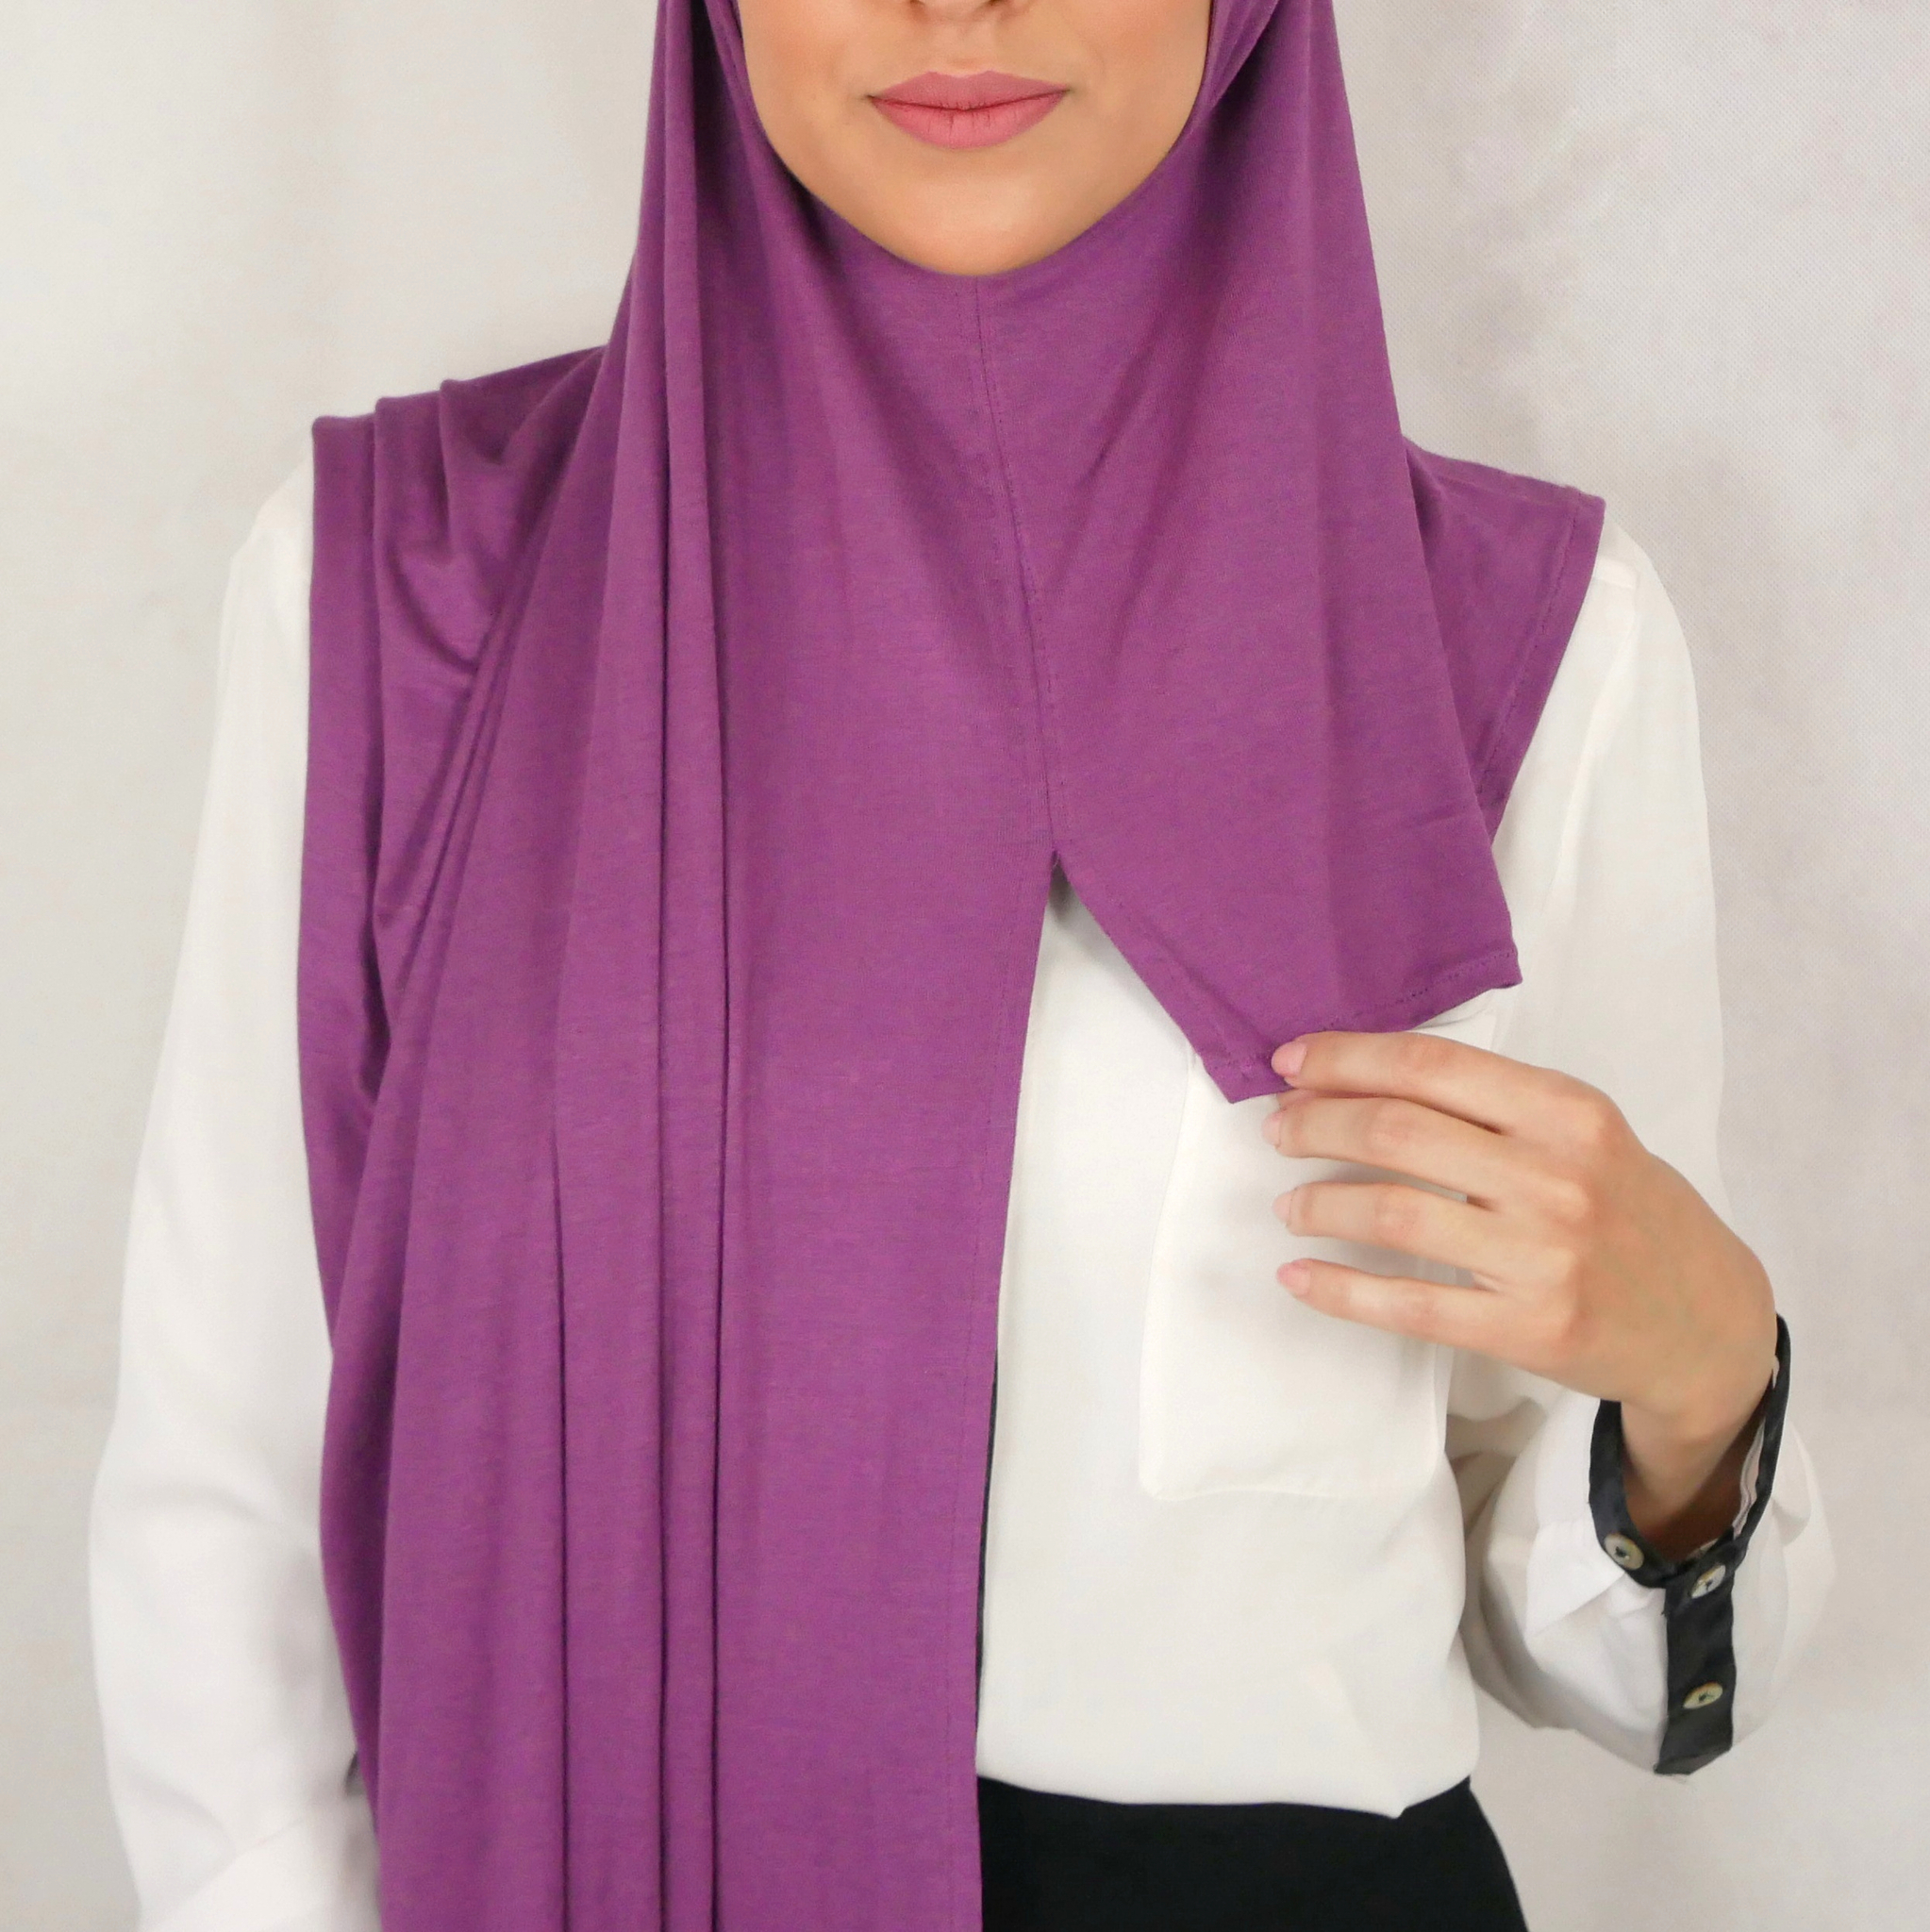 INSTANT JERSEY HIJAB - Orchid